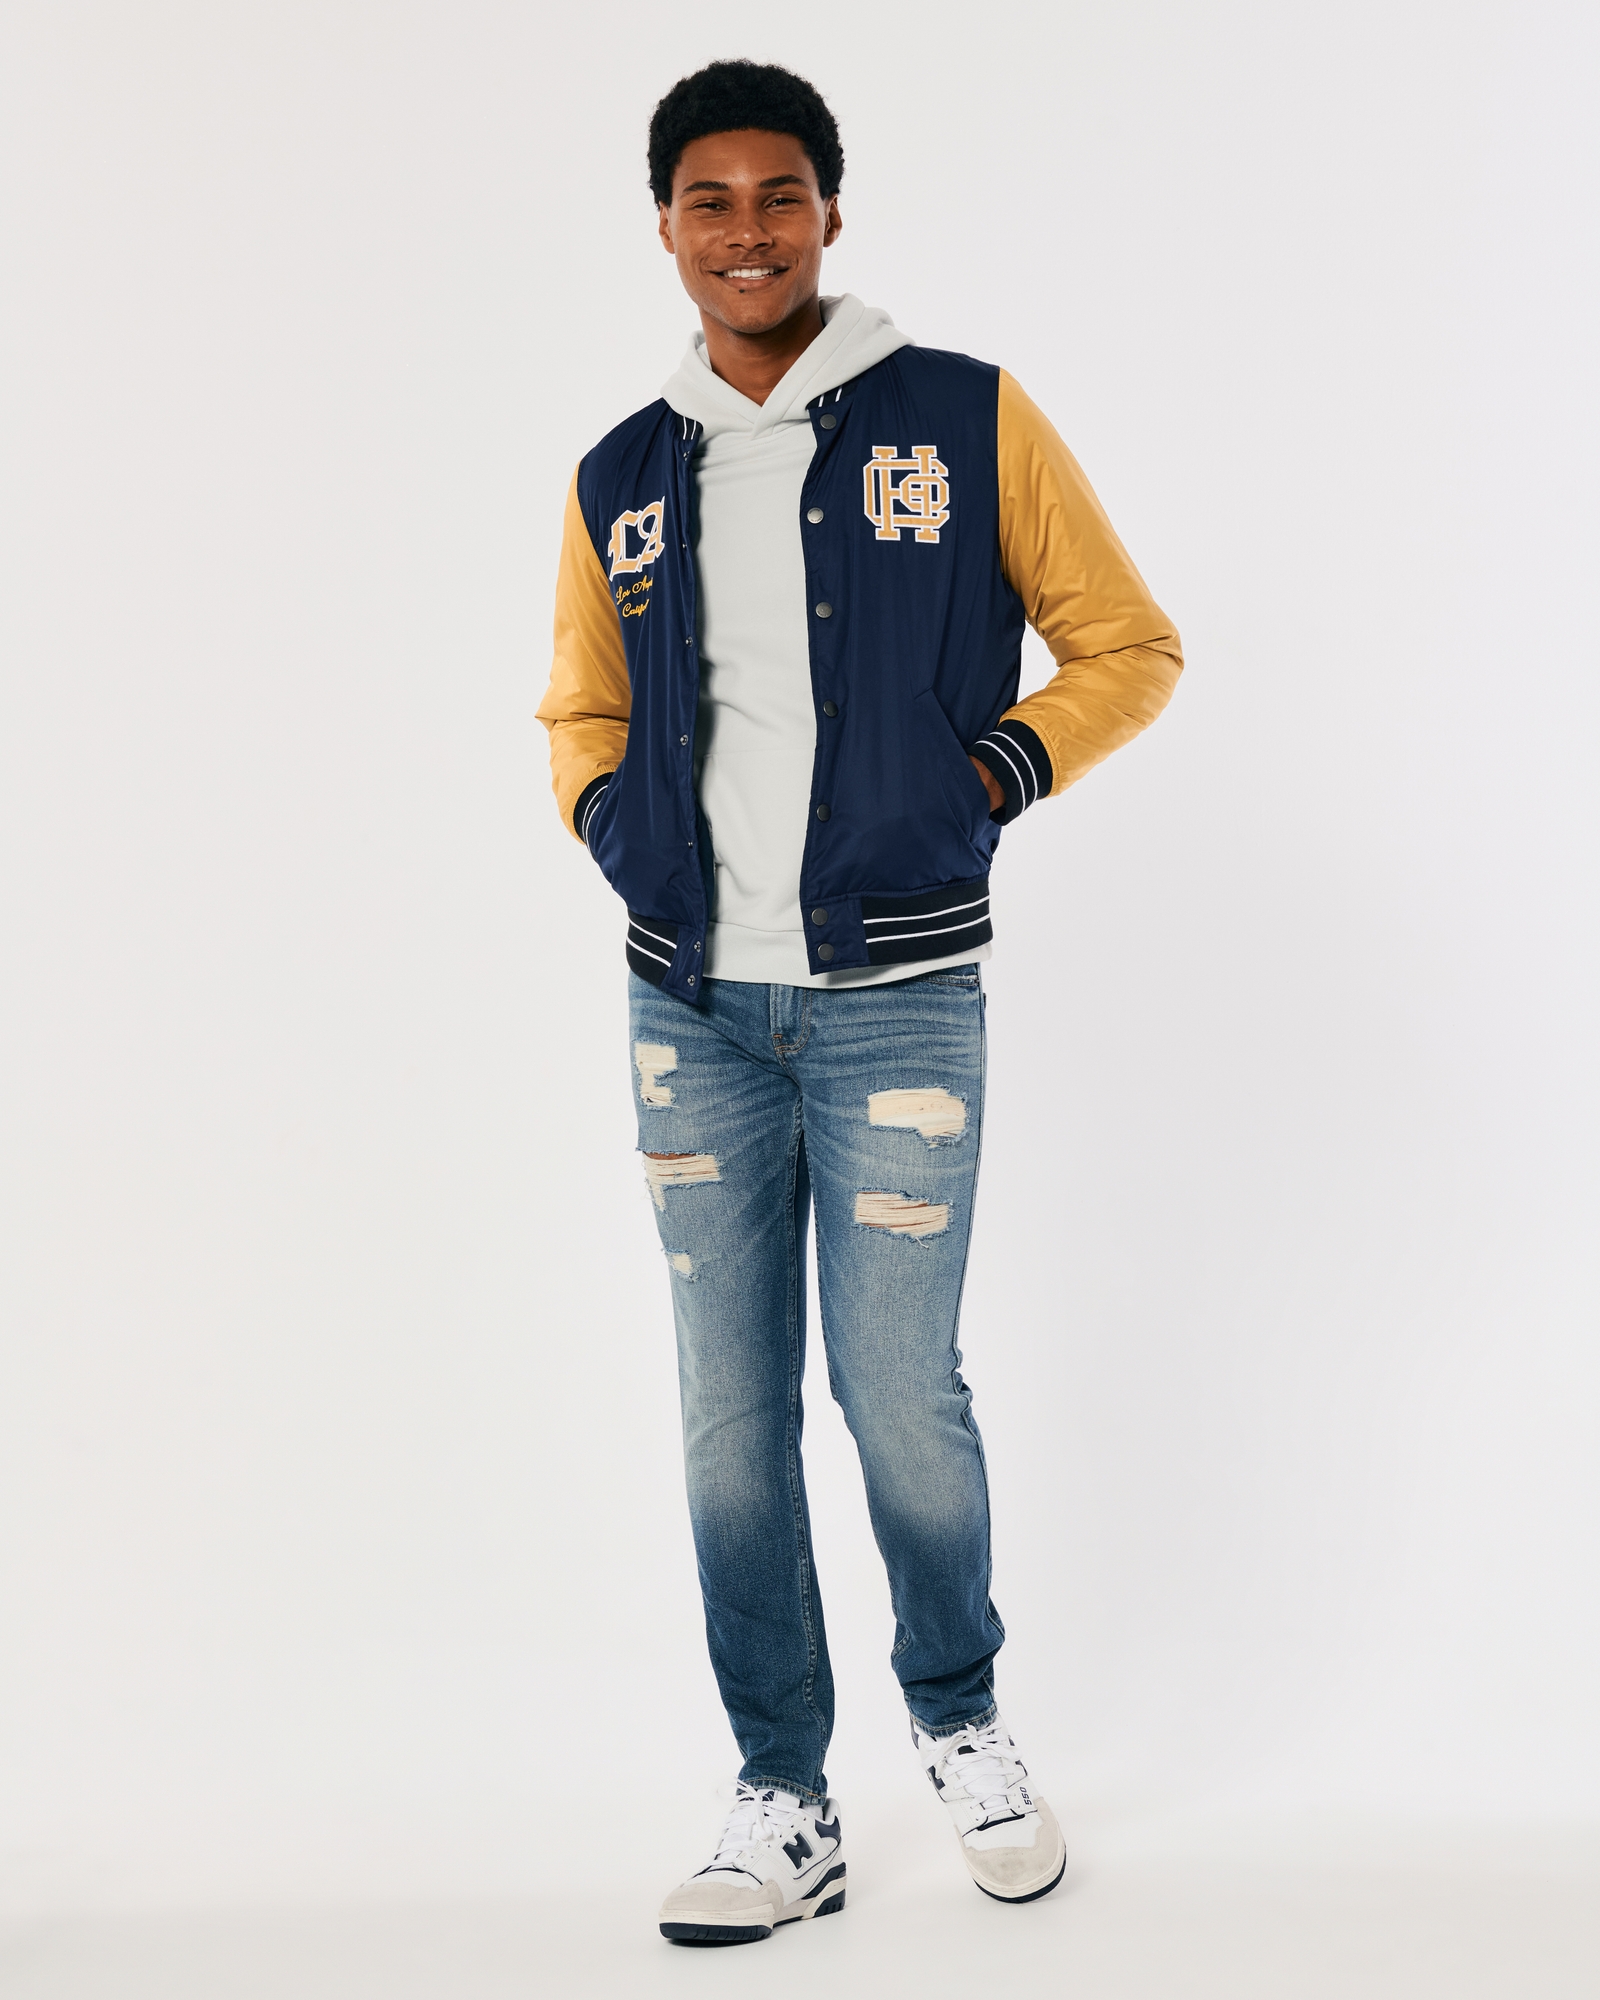 How to Wear Varsity Jacket for Men? 16 Outfit Ideas